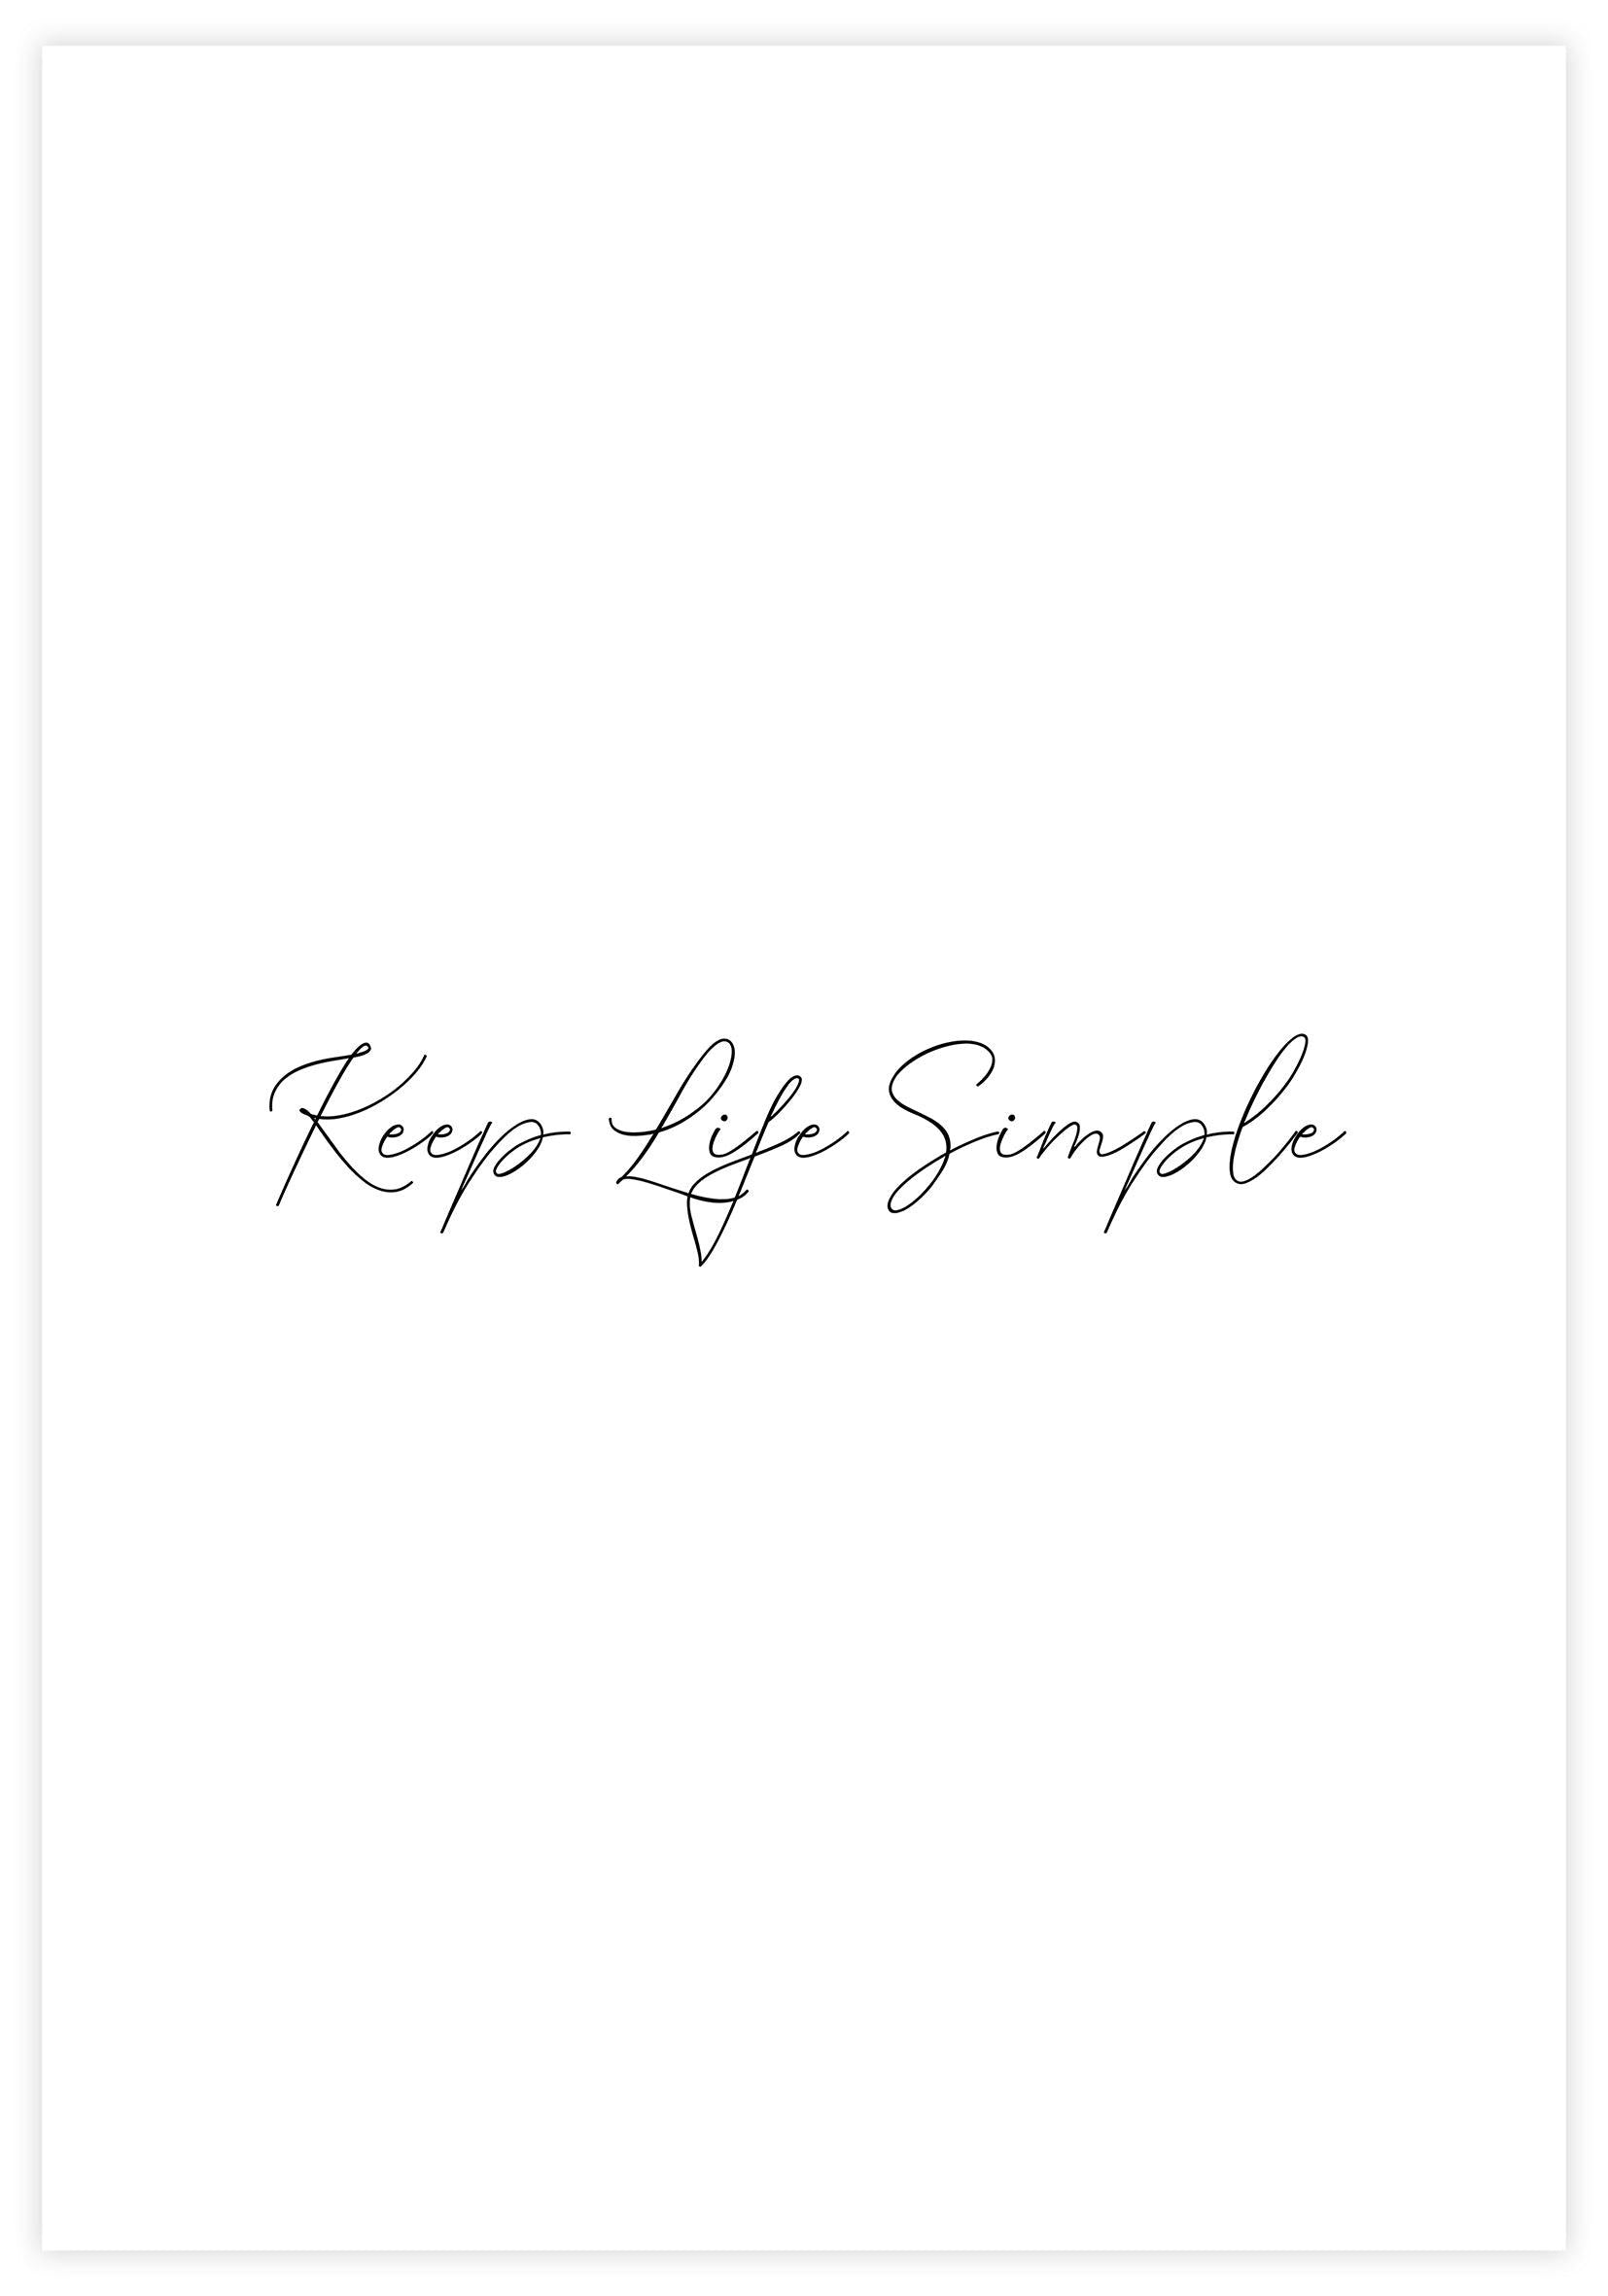 Keep Life Simple Poster